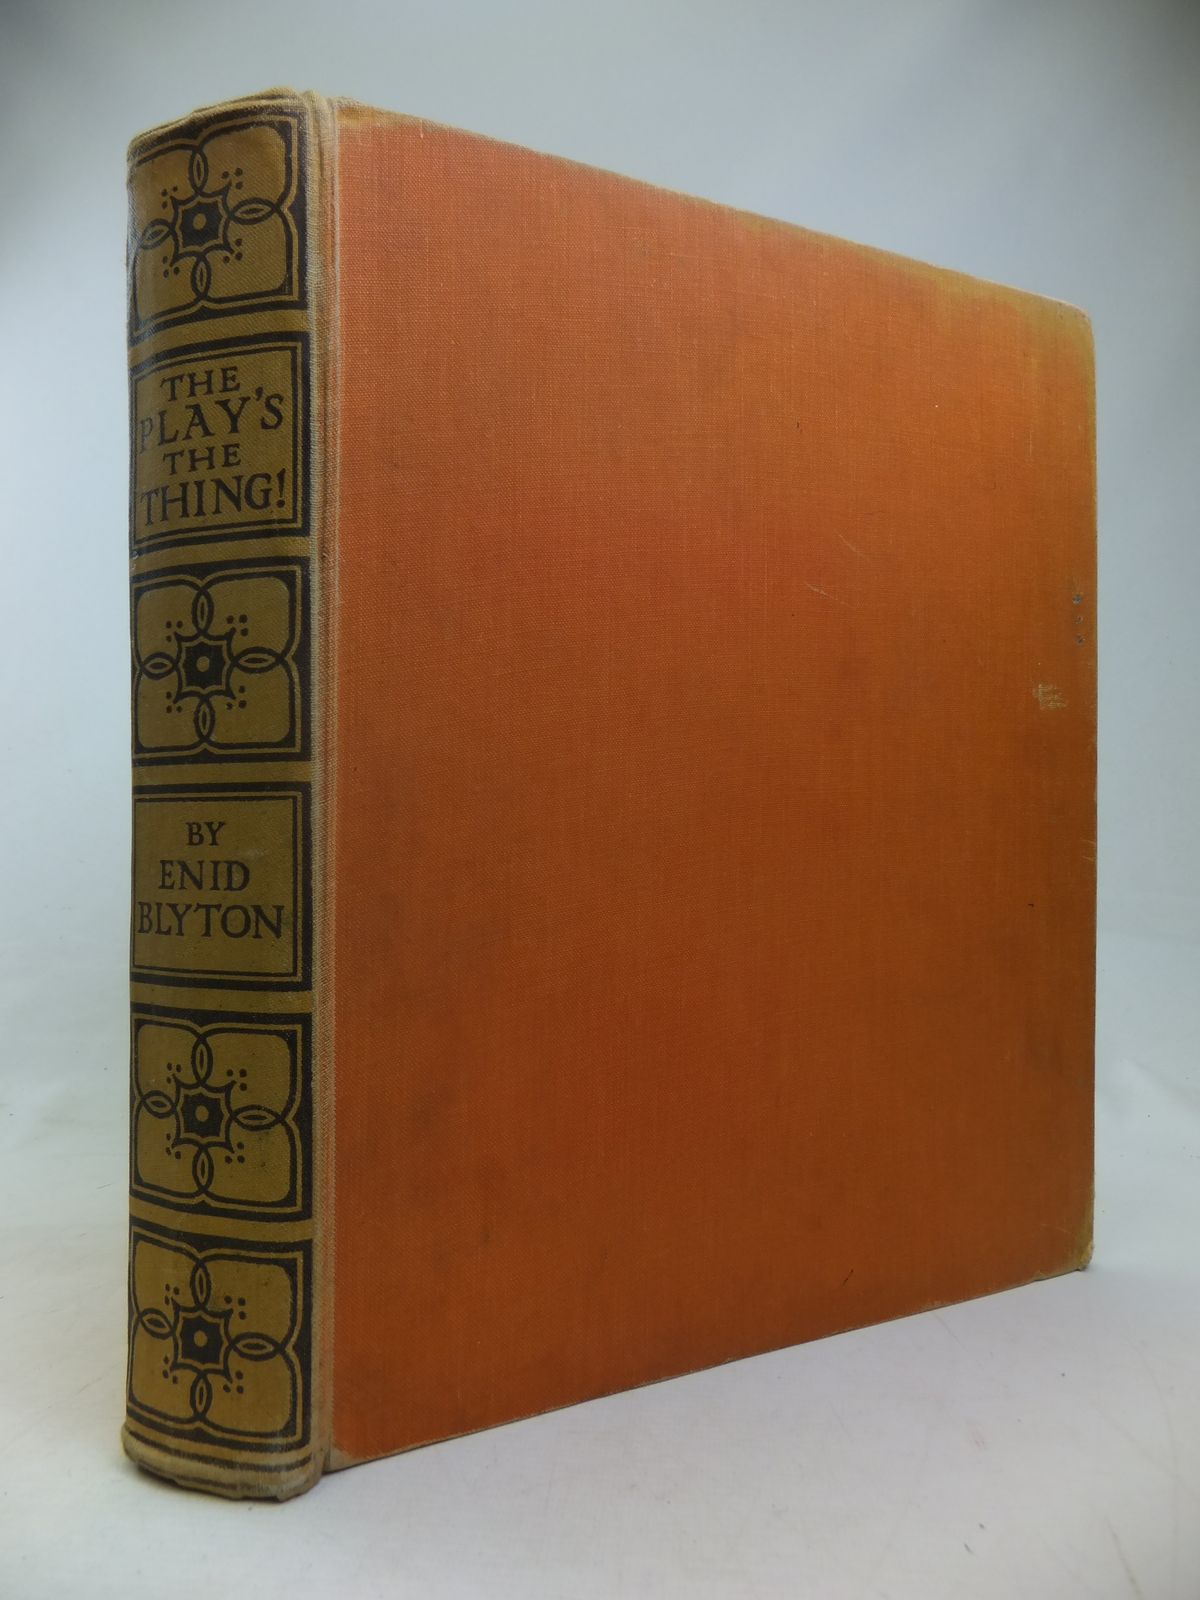 Photo of THE PLAY'S THE THING! written by Blyton, Enid illustrated by Bestall, Alfred published by The Home Library Book Company, George Newnes Limited (STOCK CODE: 2116905)  for sale by Stella & Rose's Books